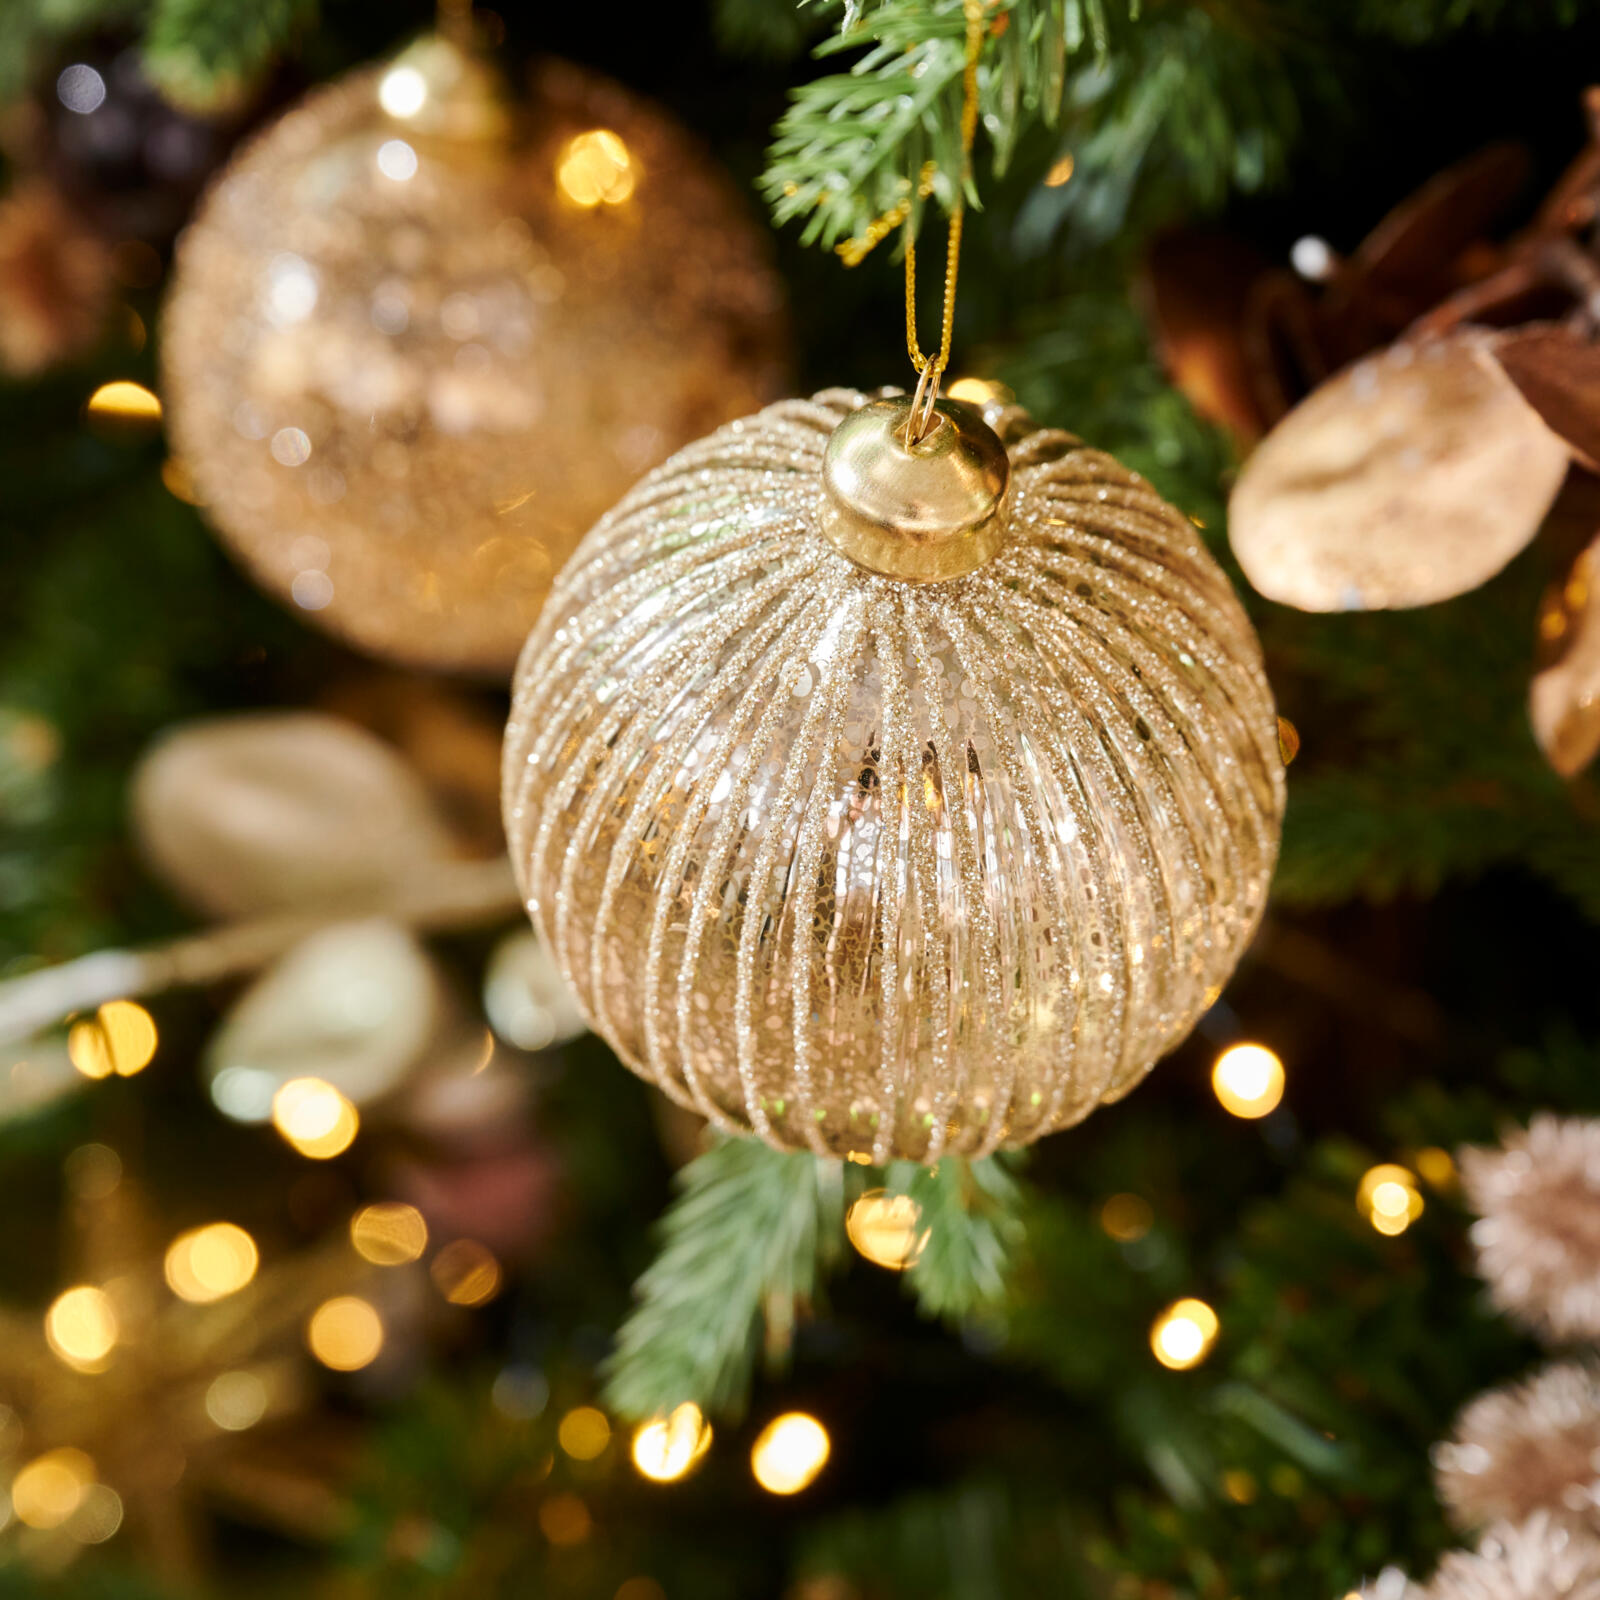 Baubles & Christmas tree decorations